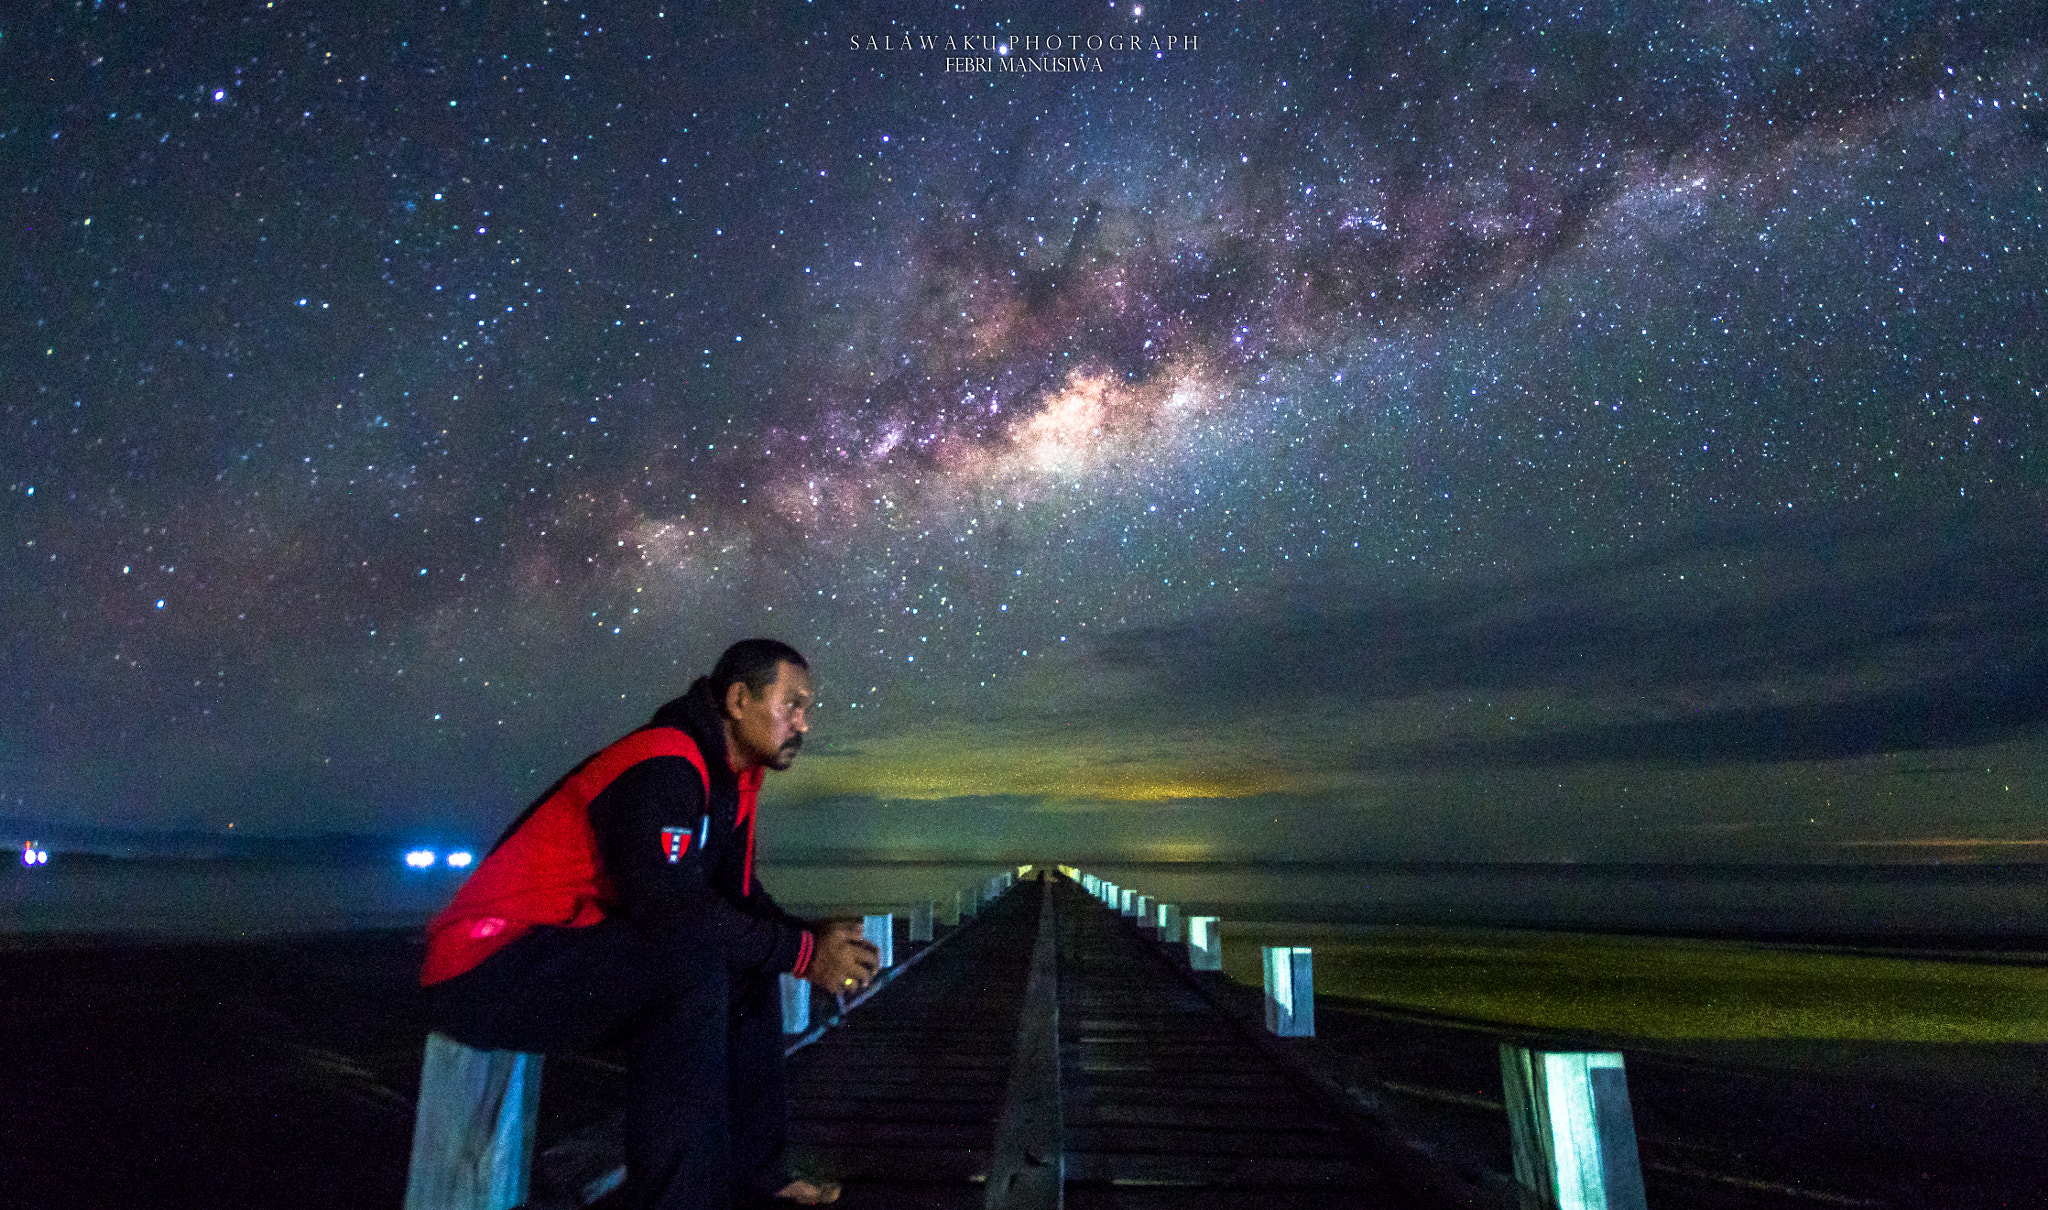 Nikon D810 sample photo. Me and my milkyway photography